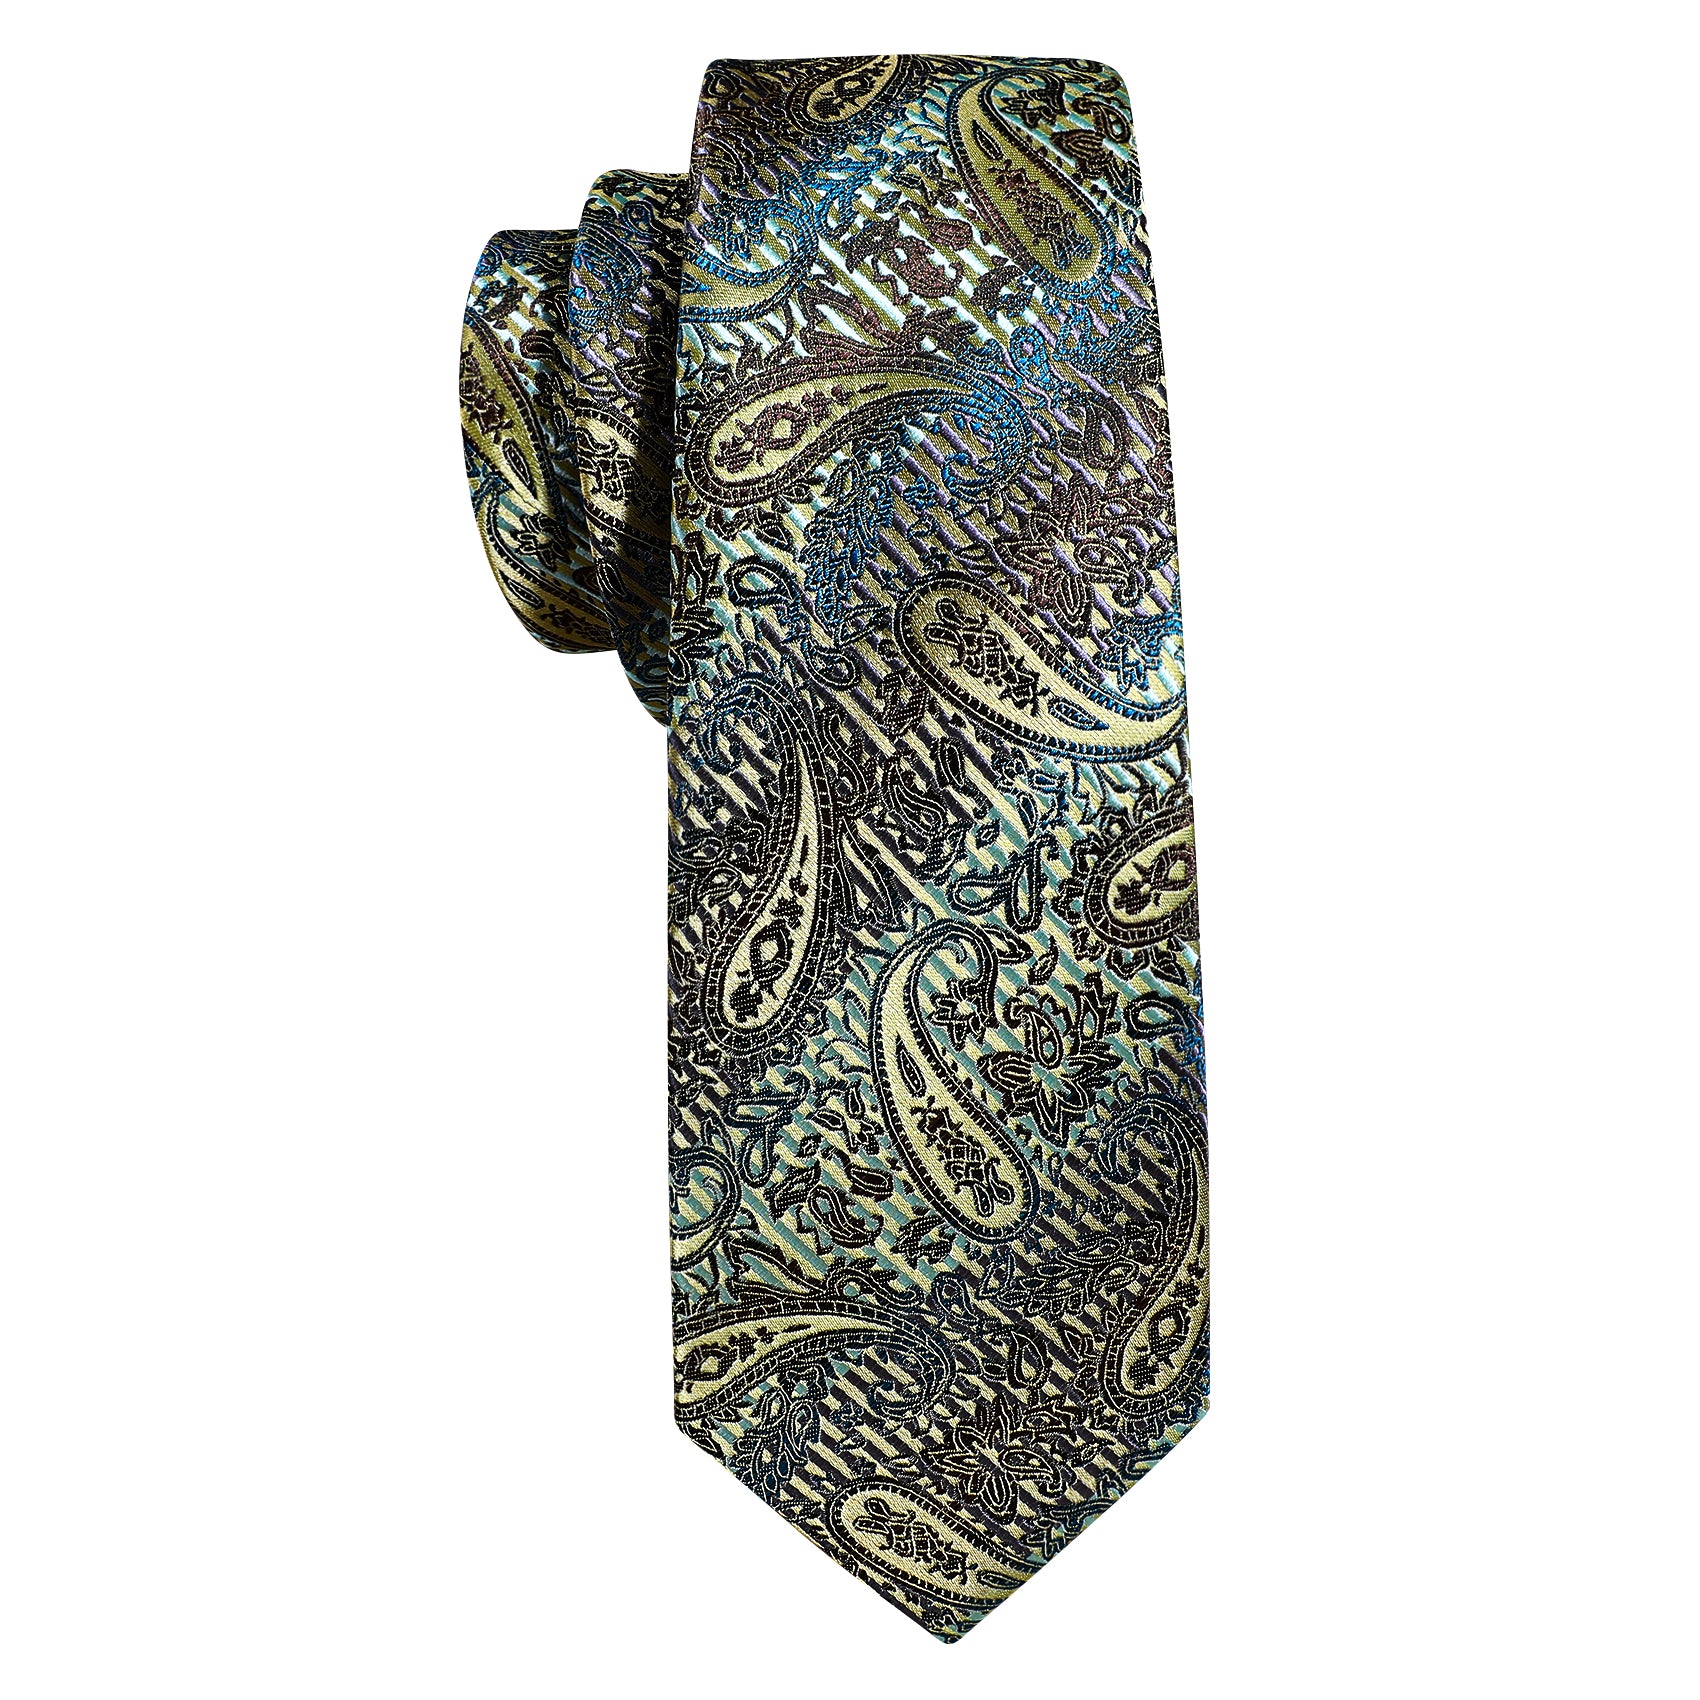 Barry.Wang Black Tie Gold Paisley Men's Silk Tie Pocket Square Cufflinks Set 59 Inches